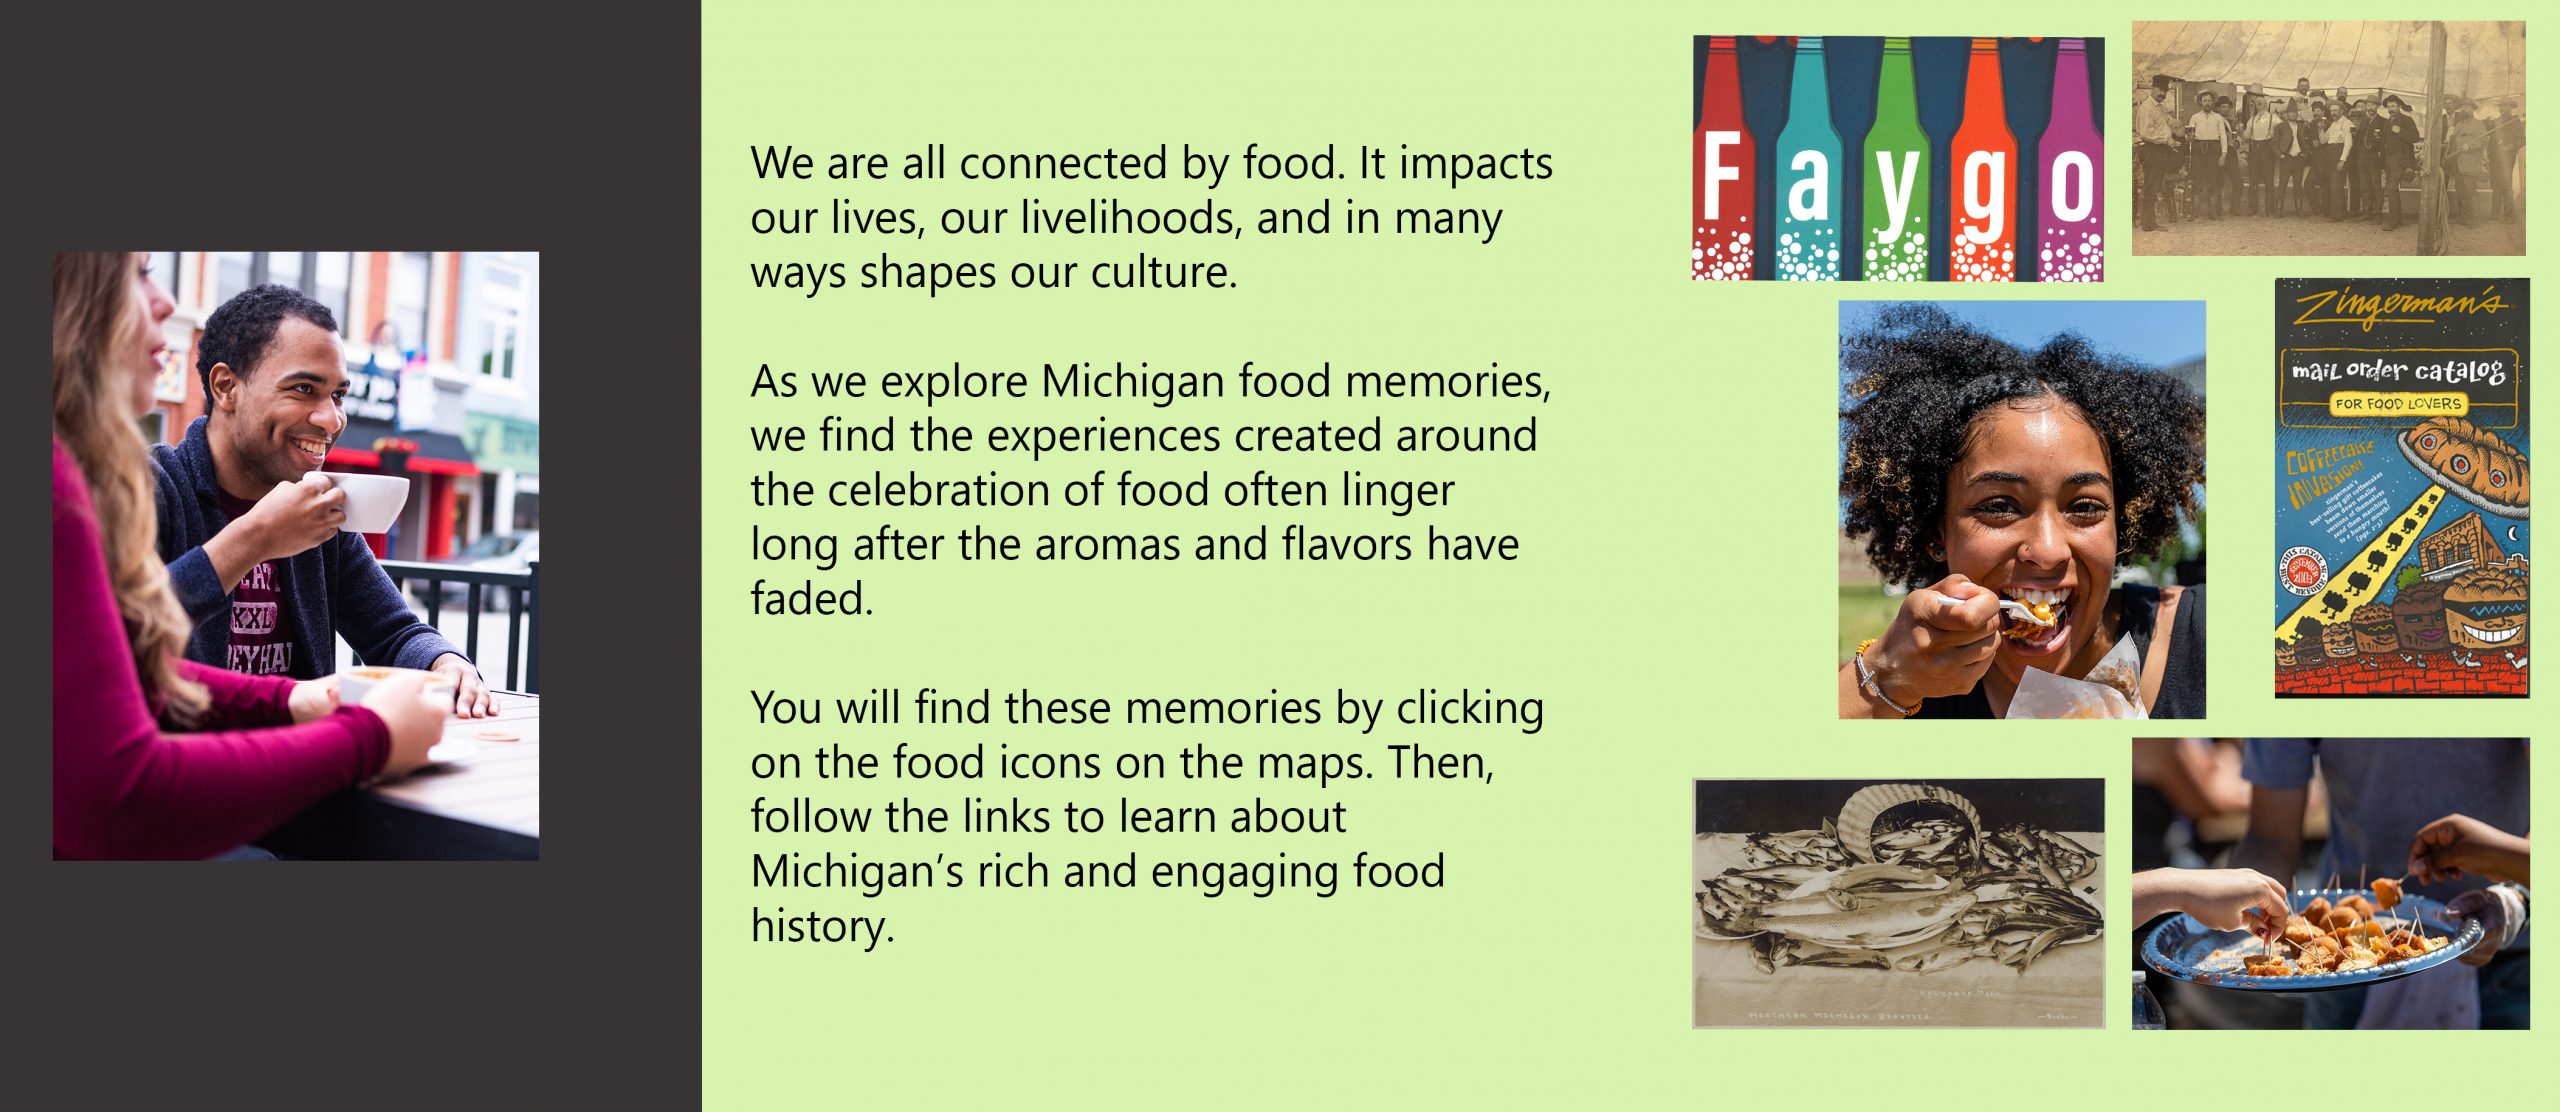 We are all connected by food. It impacts our lives, our livelihoods, and in many ways shapes our culture. as we explore Michigan food memories, we find the experiences created around the celebration of food often linger long after the aromas and flavors have faded. You will find these memories by clicking on the food icons on the maps. Then, follow the links to learn about Michigan rich and engaging food history.